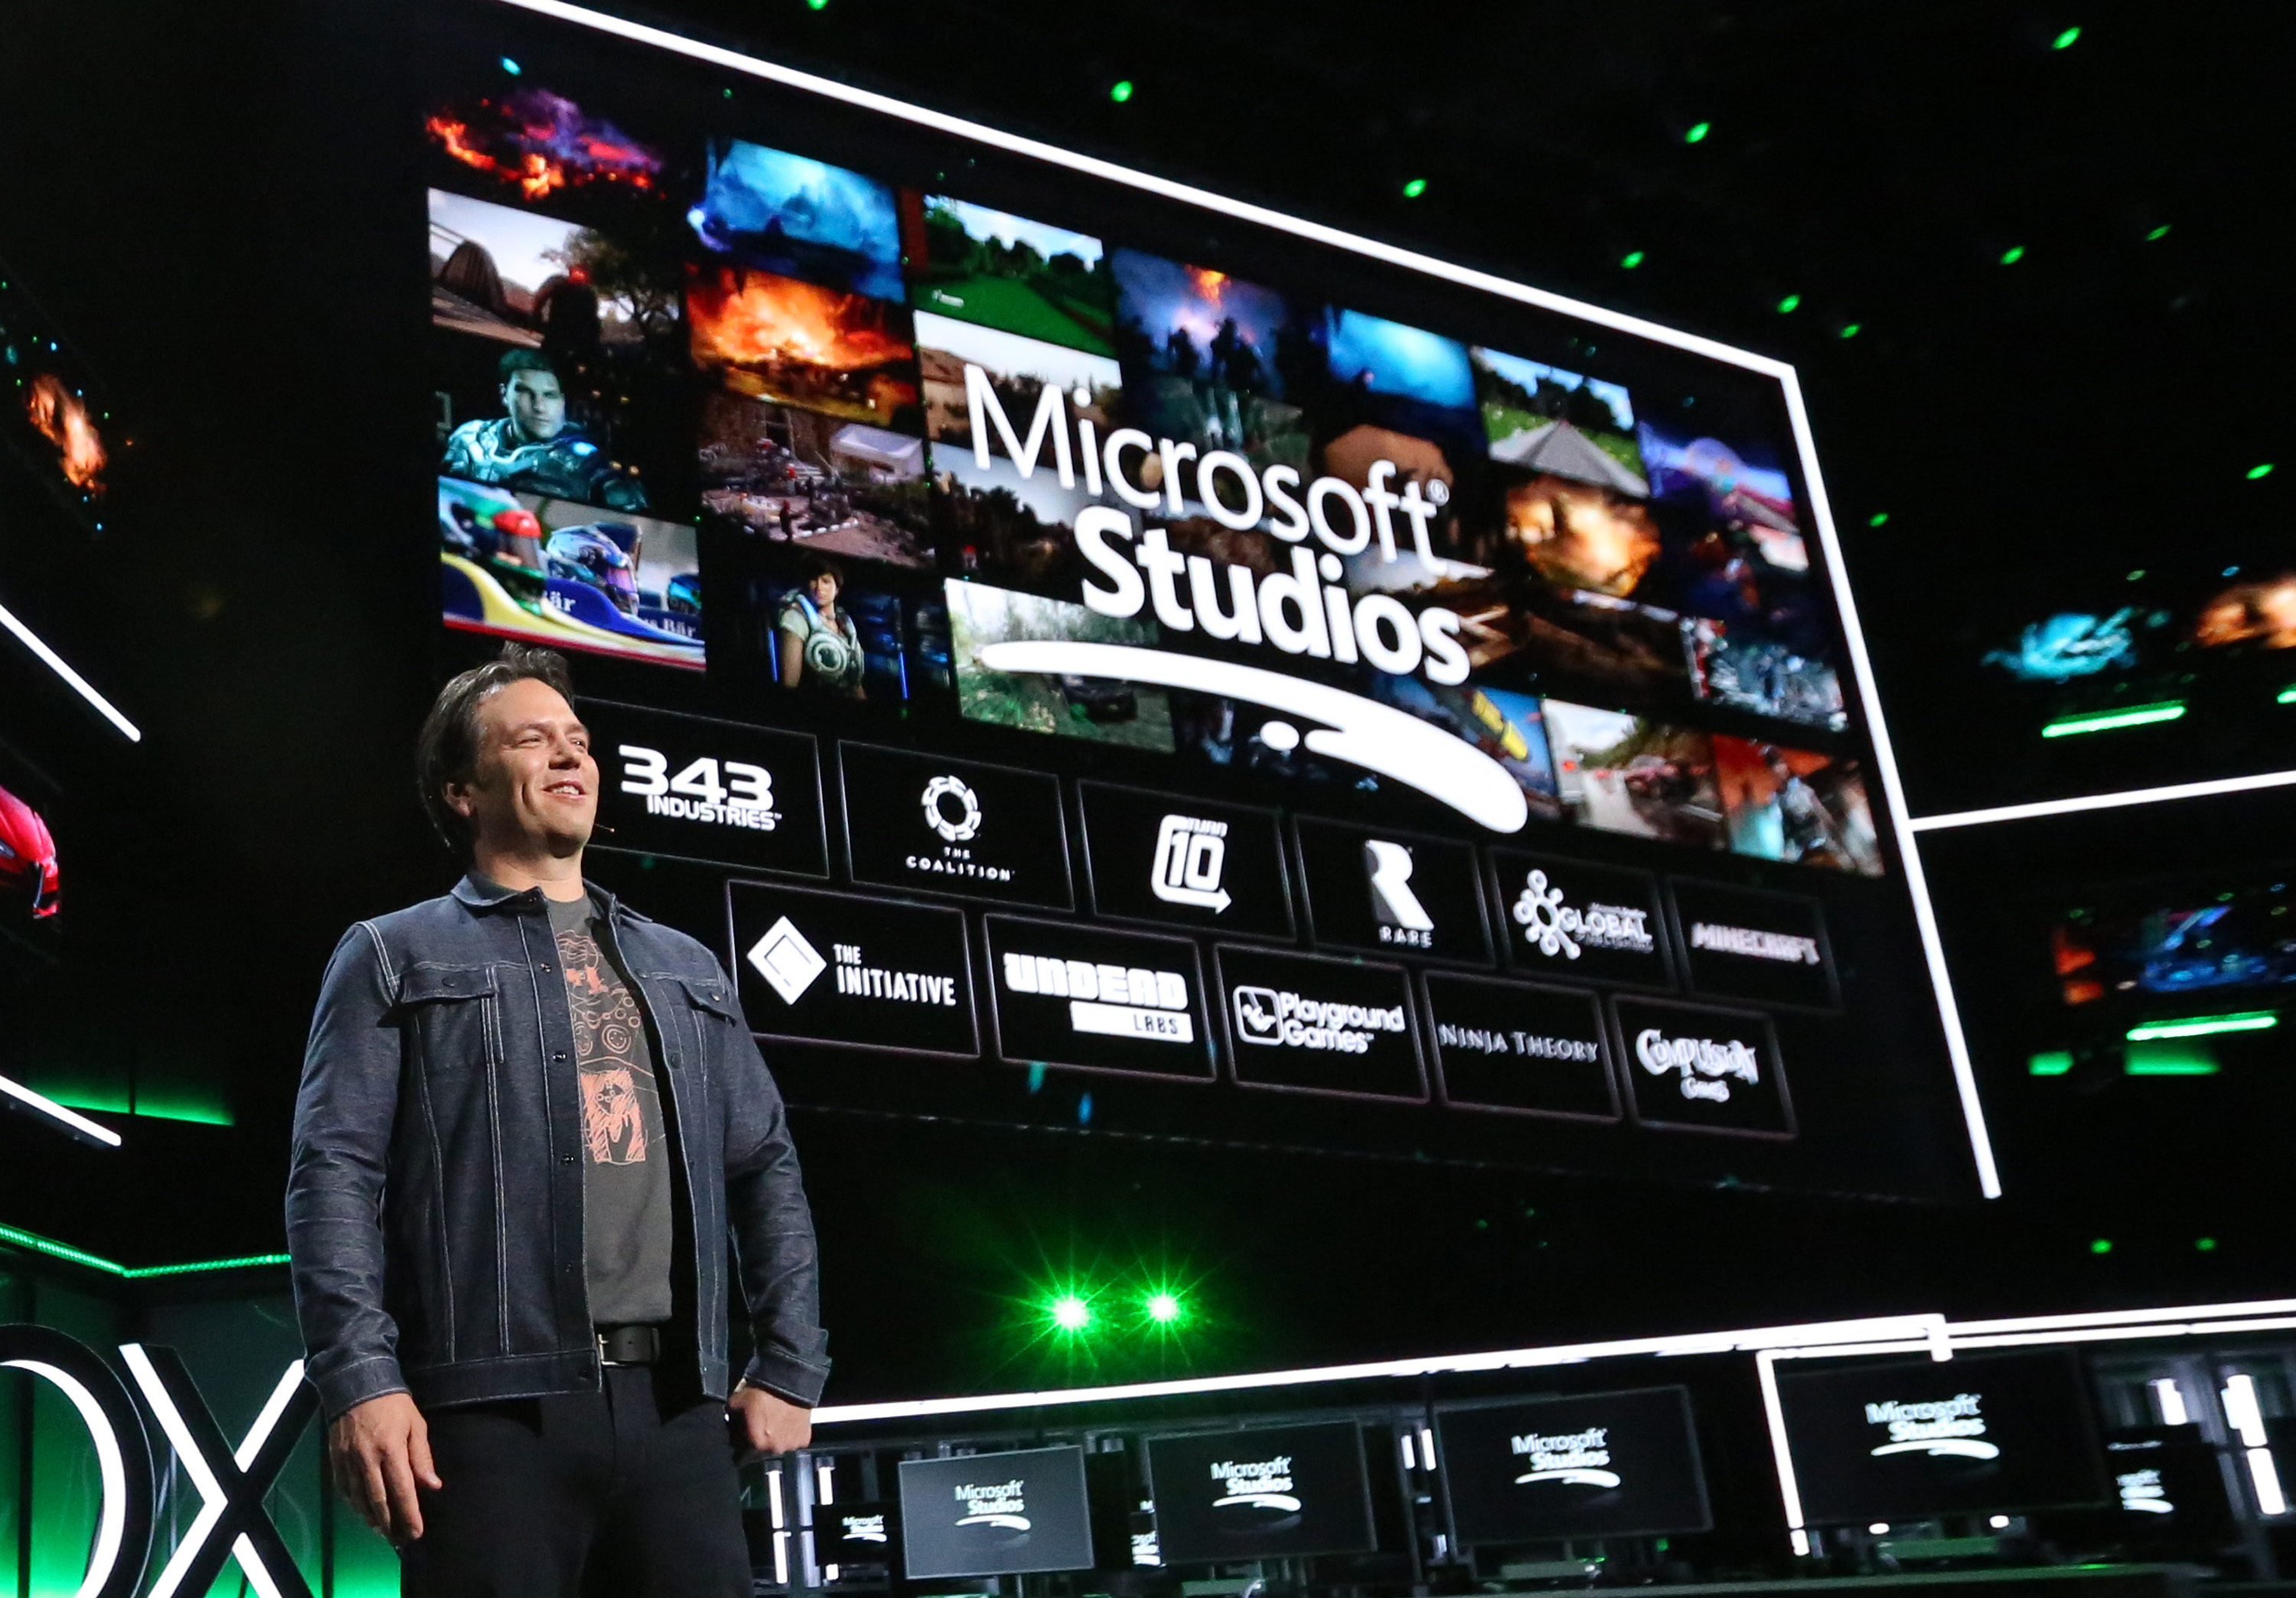 Here's where the Microsoft-Activision deal stands around the world